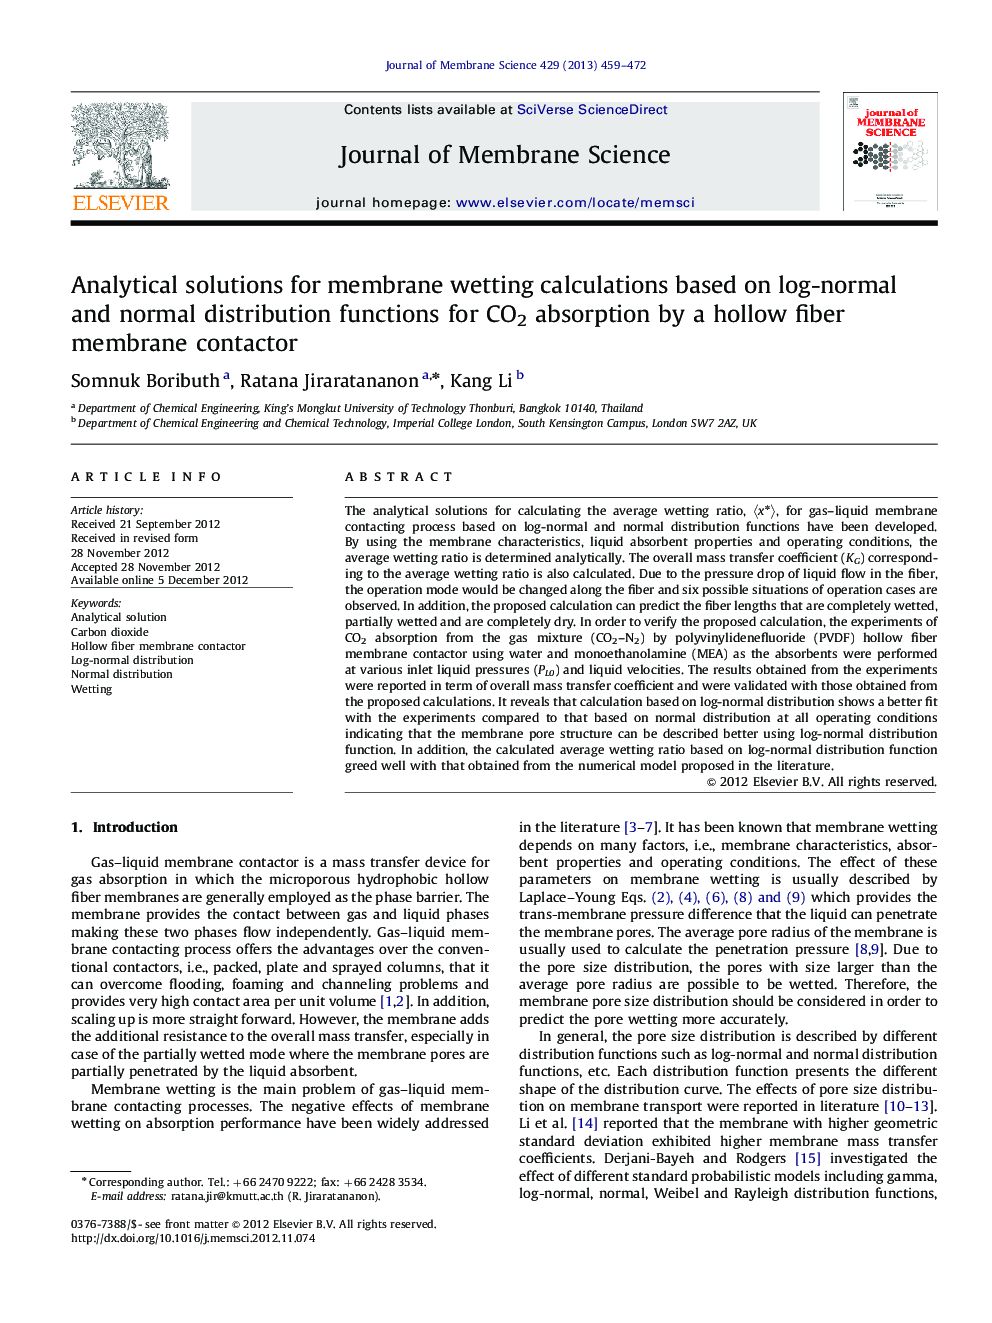 Analytical solutions for membrane wetting calculations based on log-normal and normal distribution functions for CO2 absorption by a hollow fiber membrane contactor